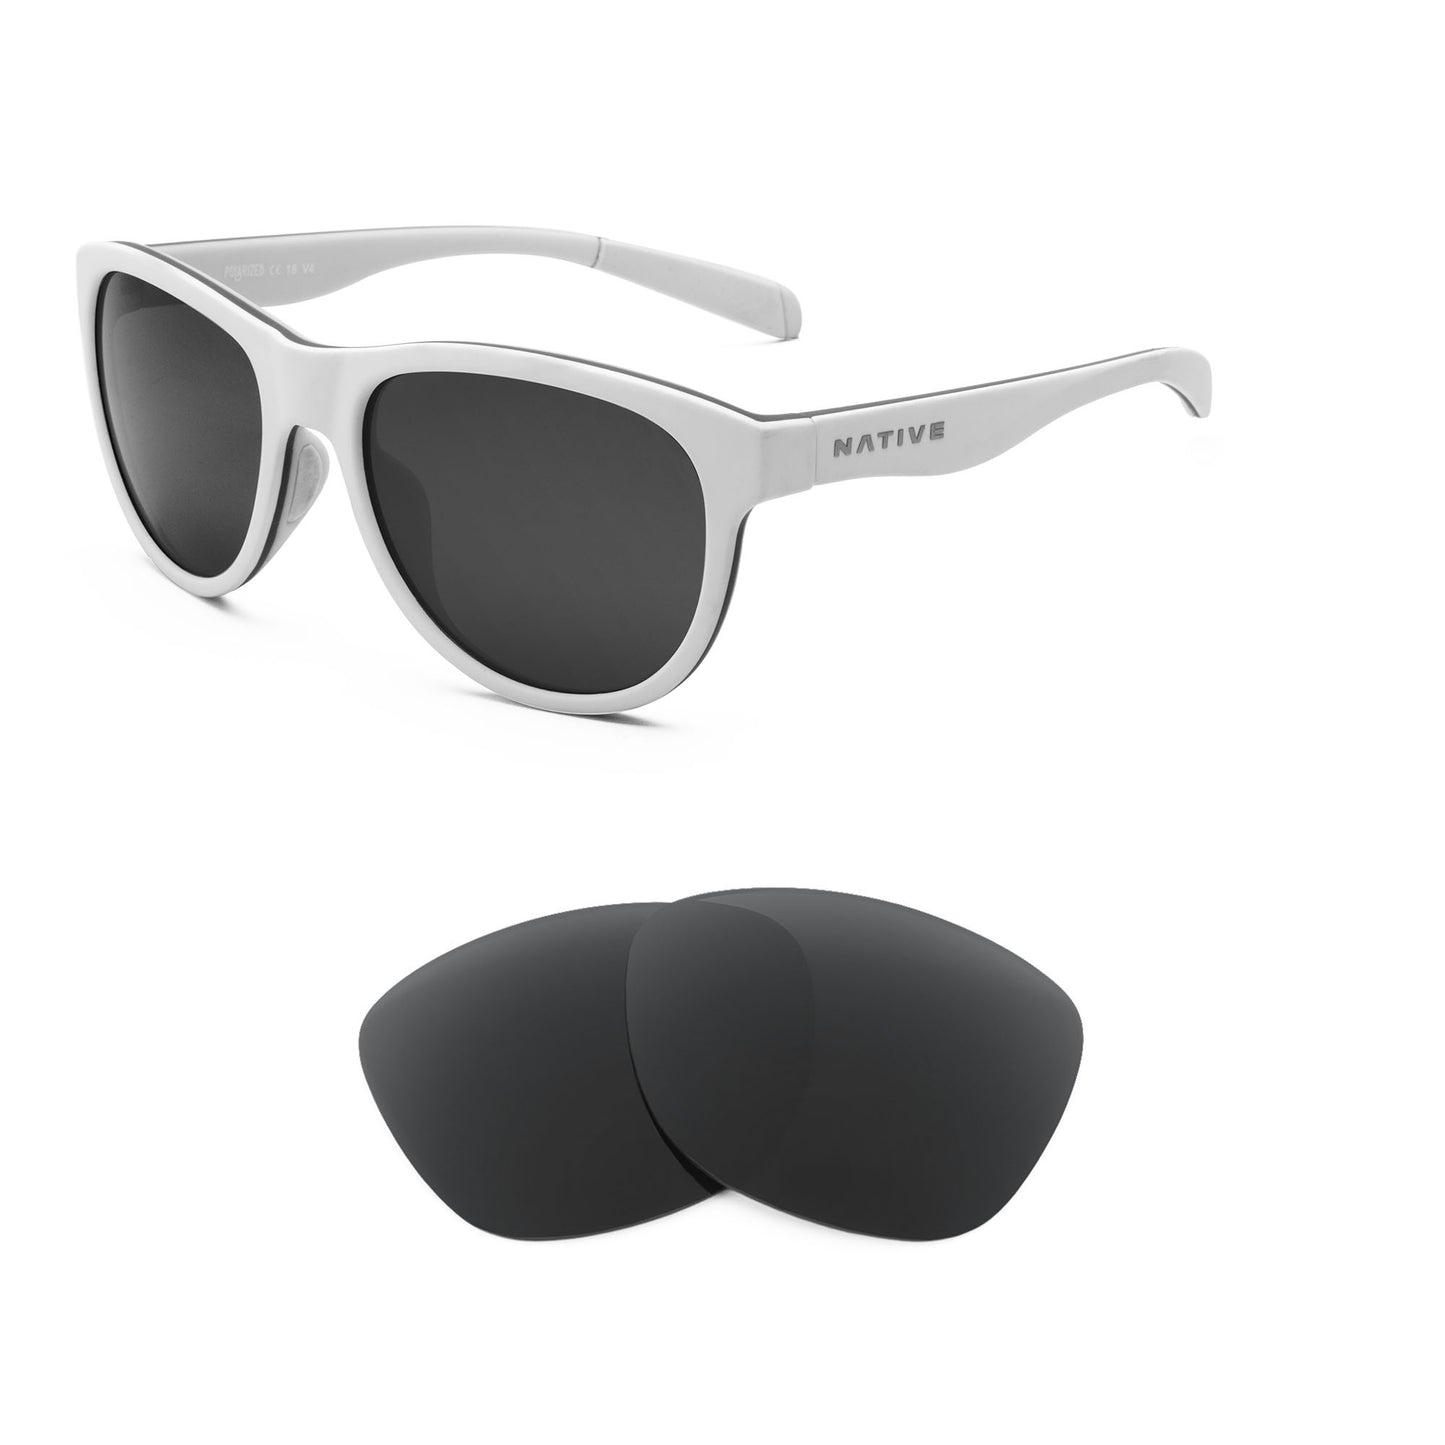 Native Acadia sunglasses with replacement lenses